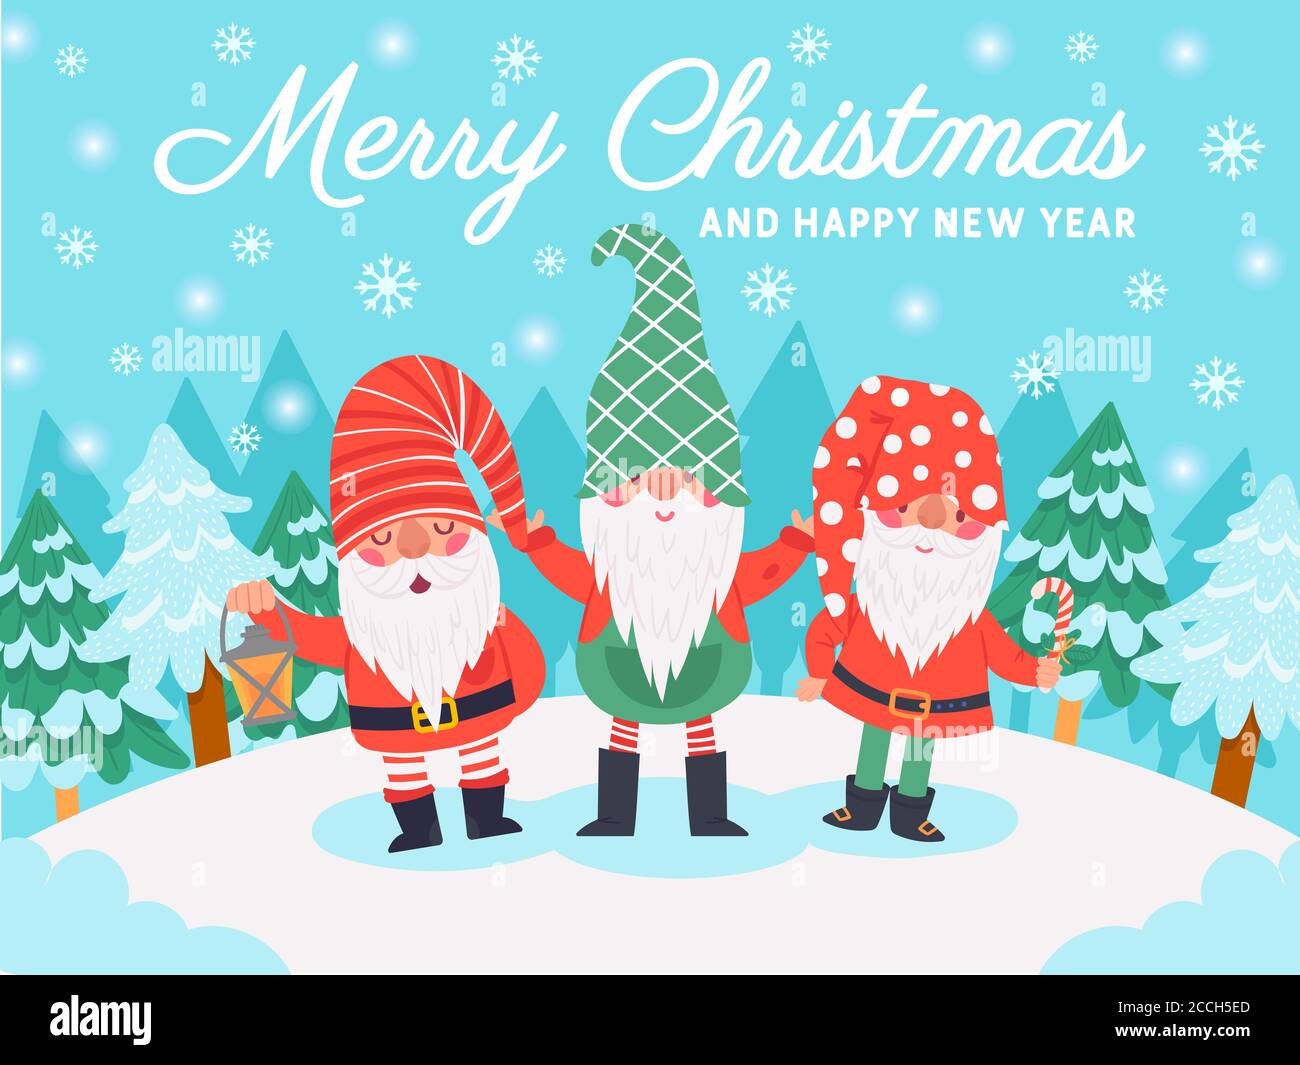 Gnomes christmas characters. Xmas greeting card with cute dwarfs, winter elements and lettering, december holidays vector background Stock Vector